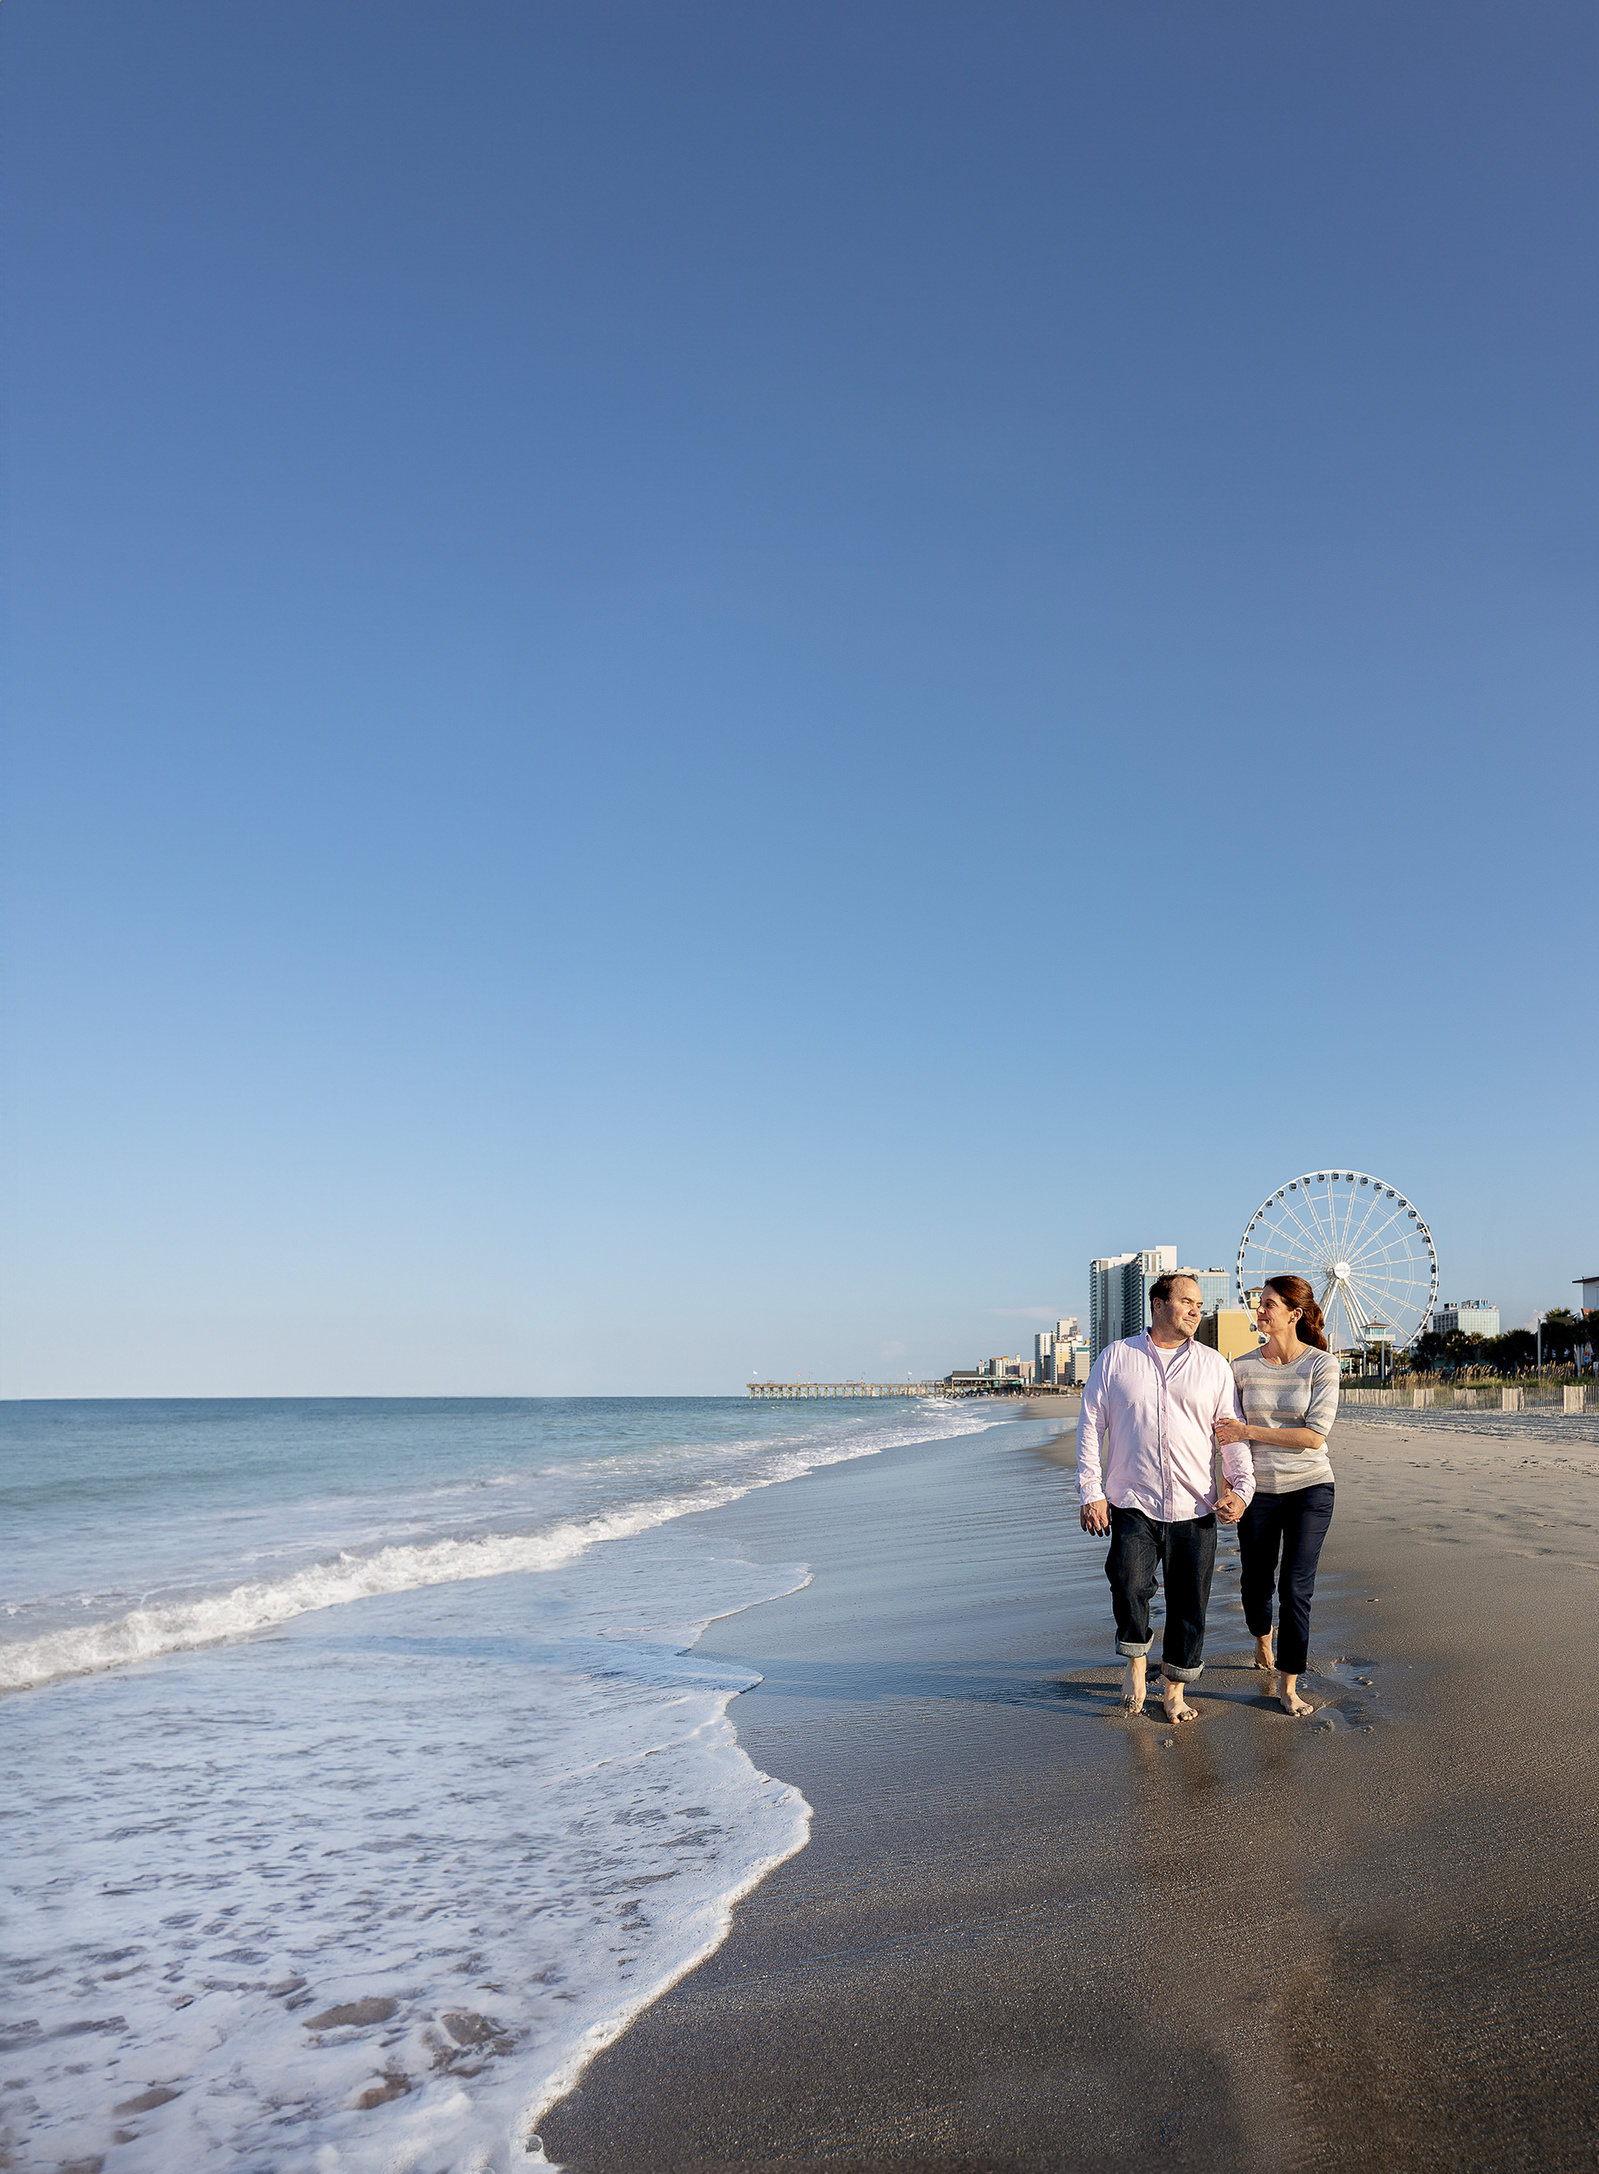 Couple walking on the beach in Myrtle Beach South Carolina with the Sky Wheel in the background on a sunny day.